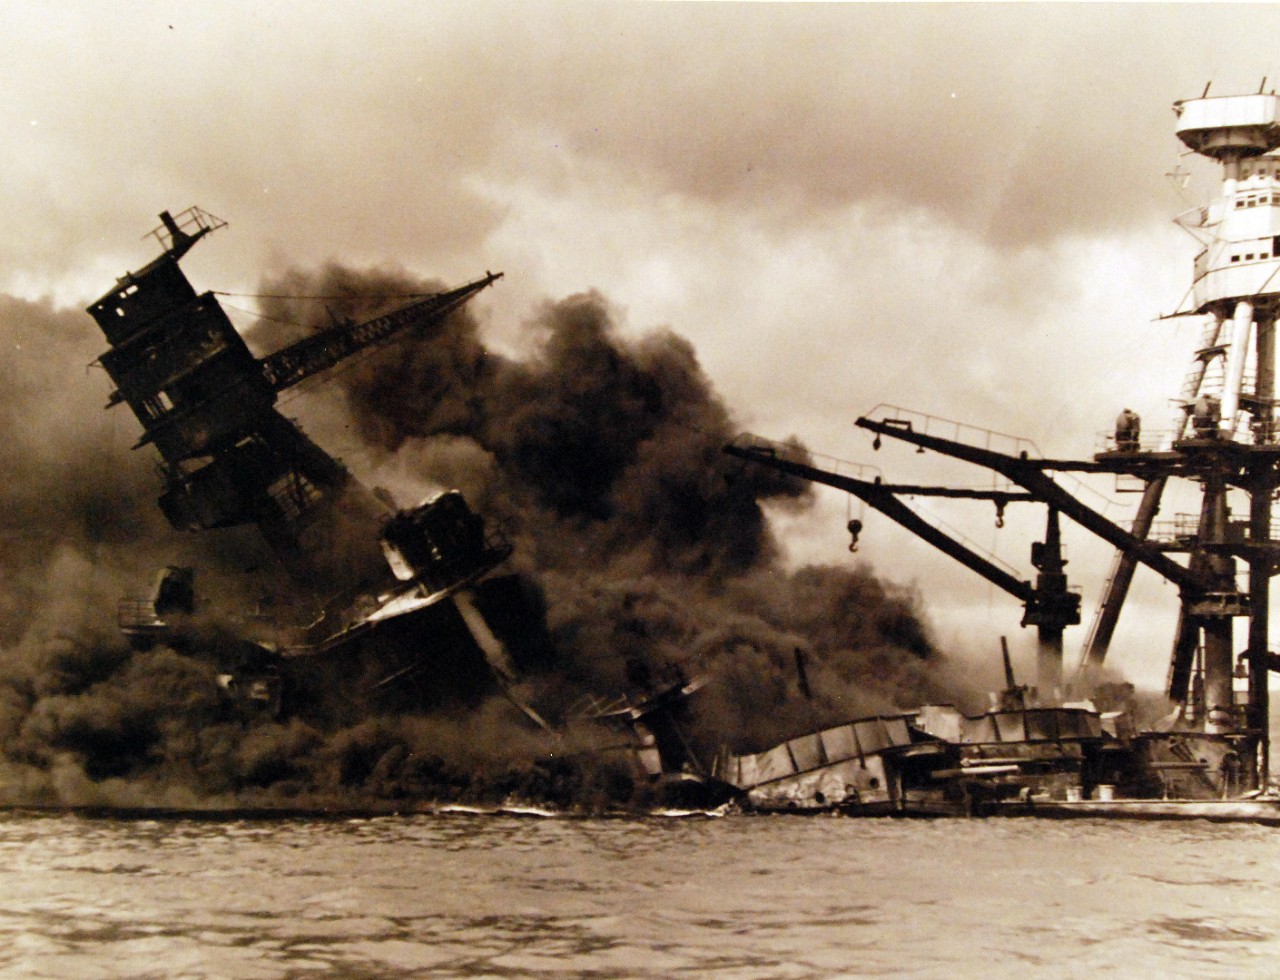 80-G-32427:  Japanese Attack on Pearl Harbor, December 7, 1941.   USS Arizona (BB 39) burning after the attack. Official U.S. Navy photograph, now in the collections of the National Archives.    (9/15/15).